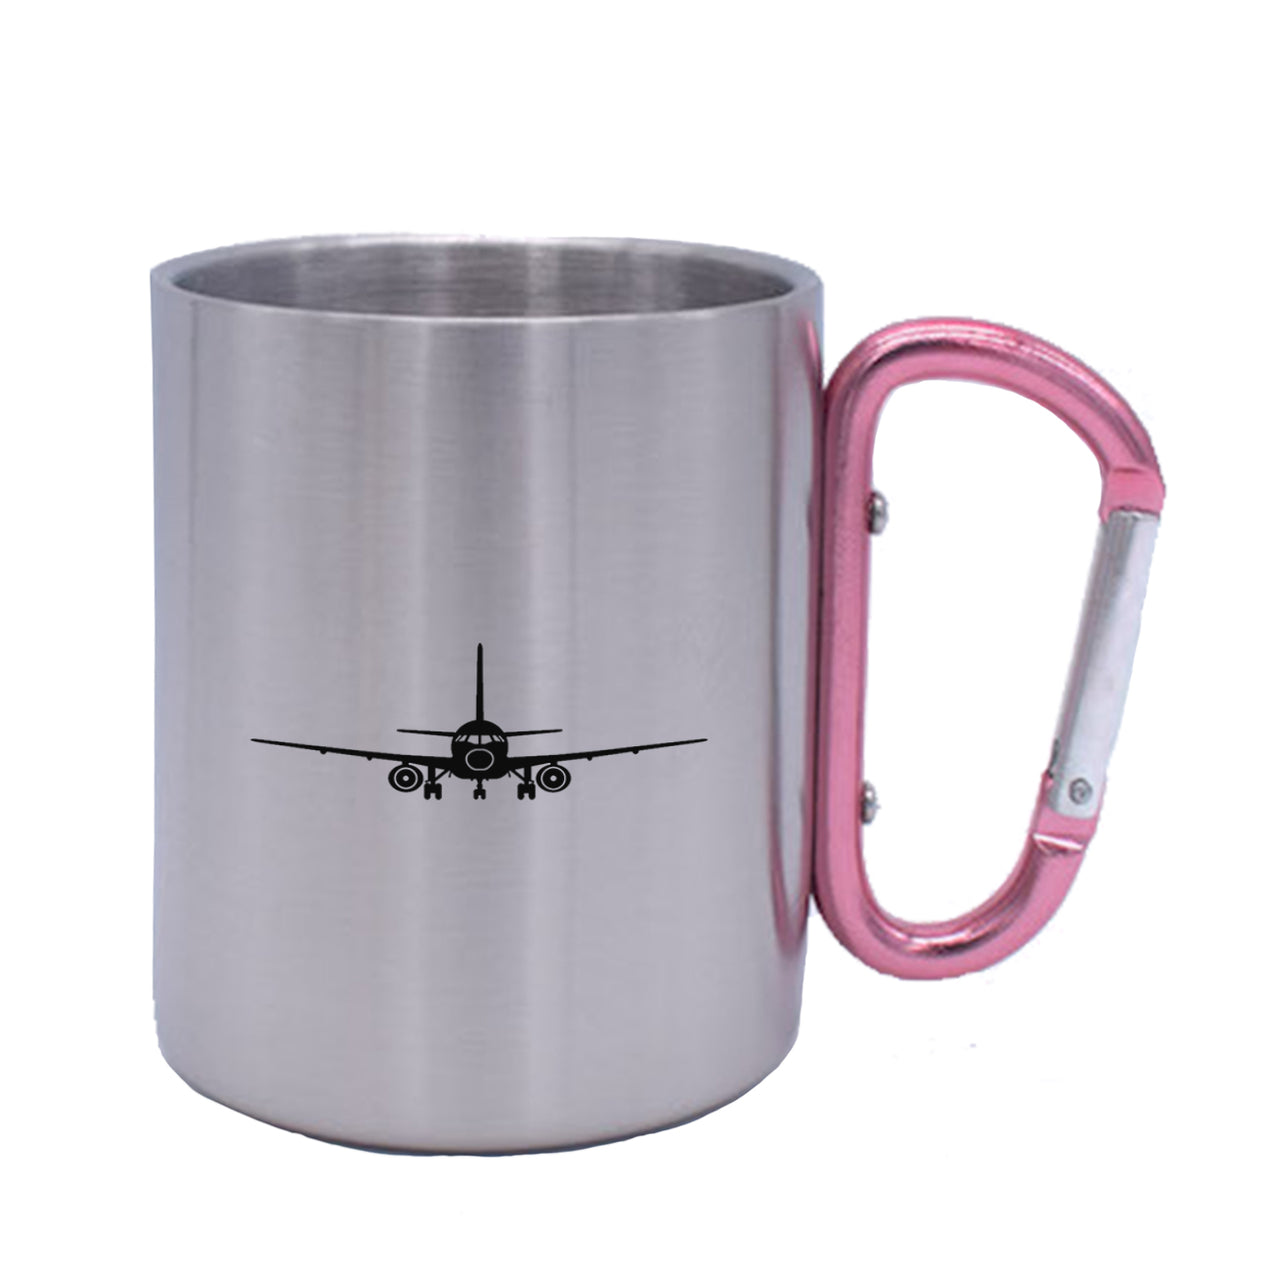 Sukhoi Superjet 100 Silhouette Designed Stainless Steel Outdoors Mugs